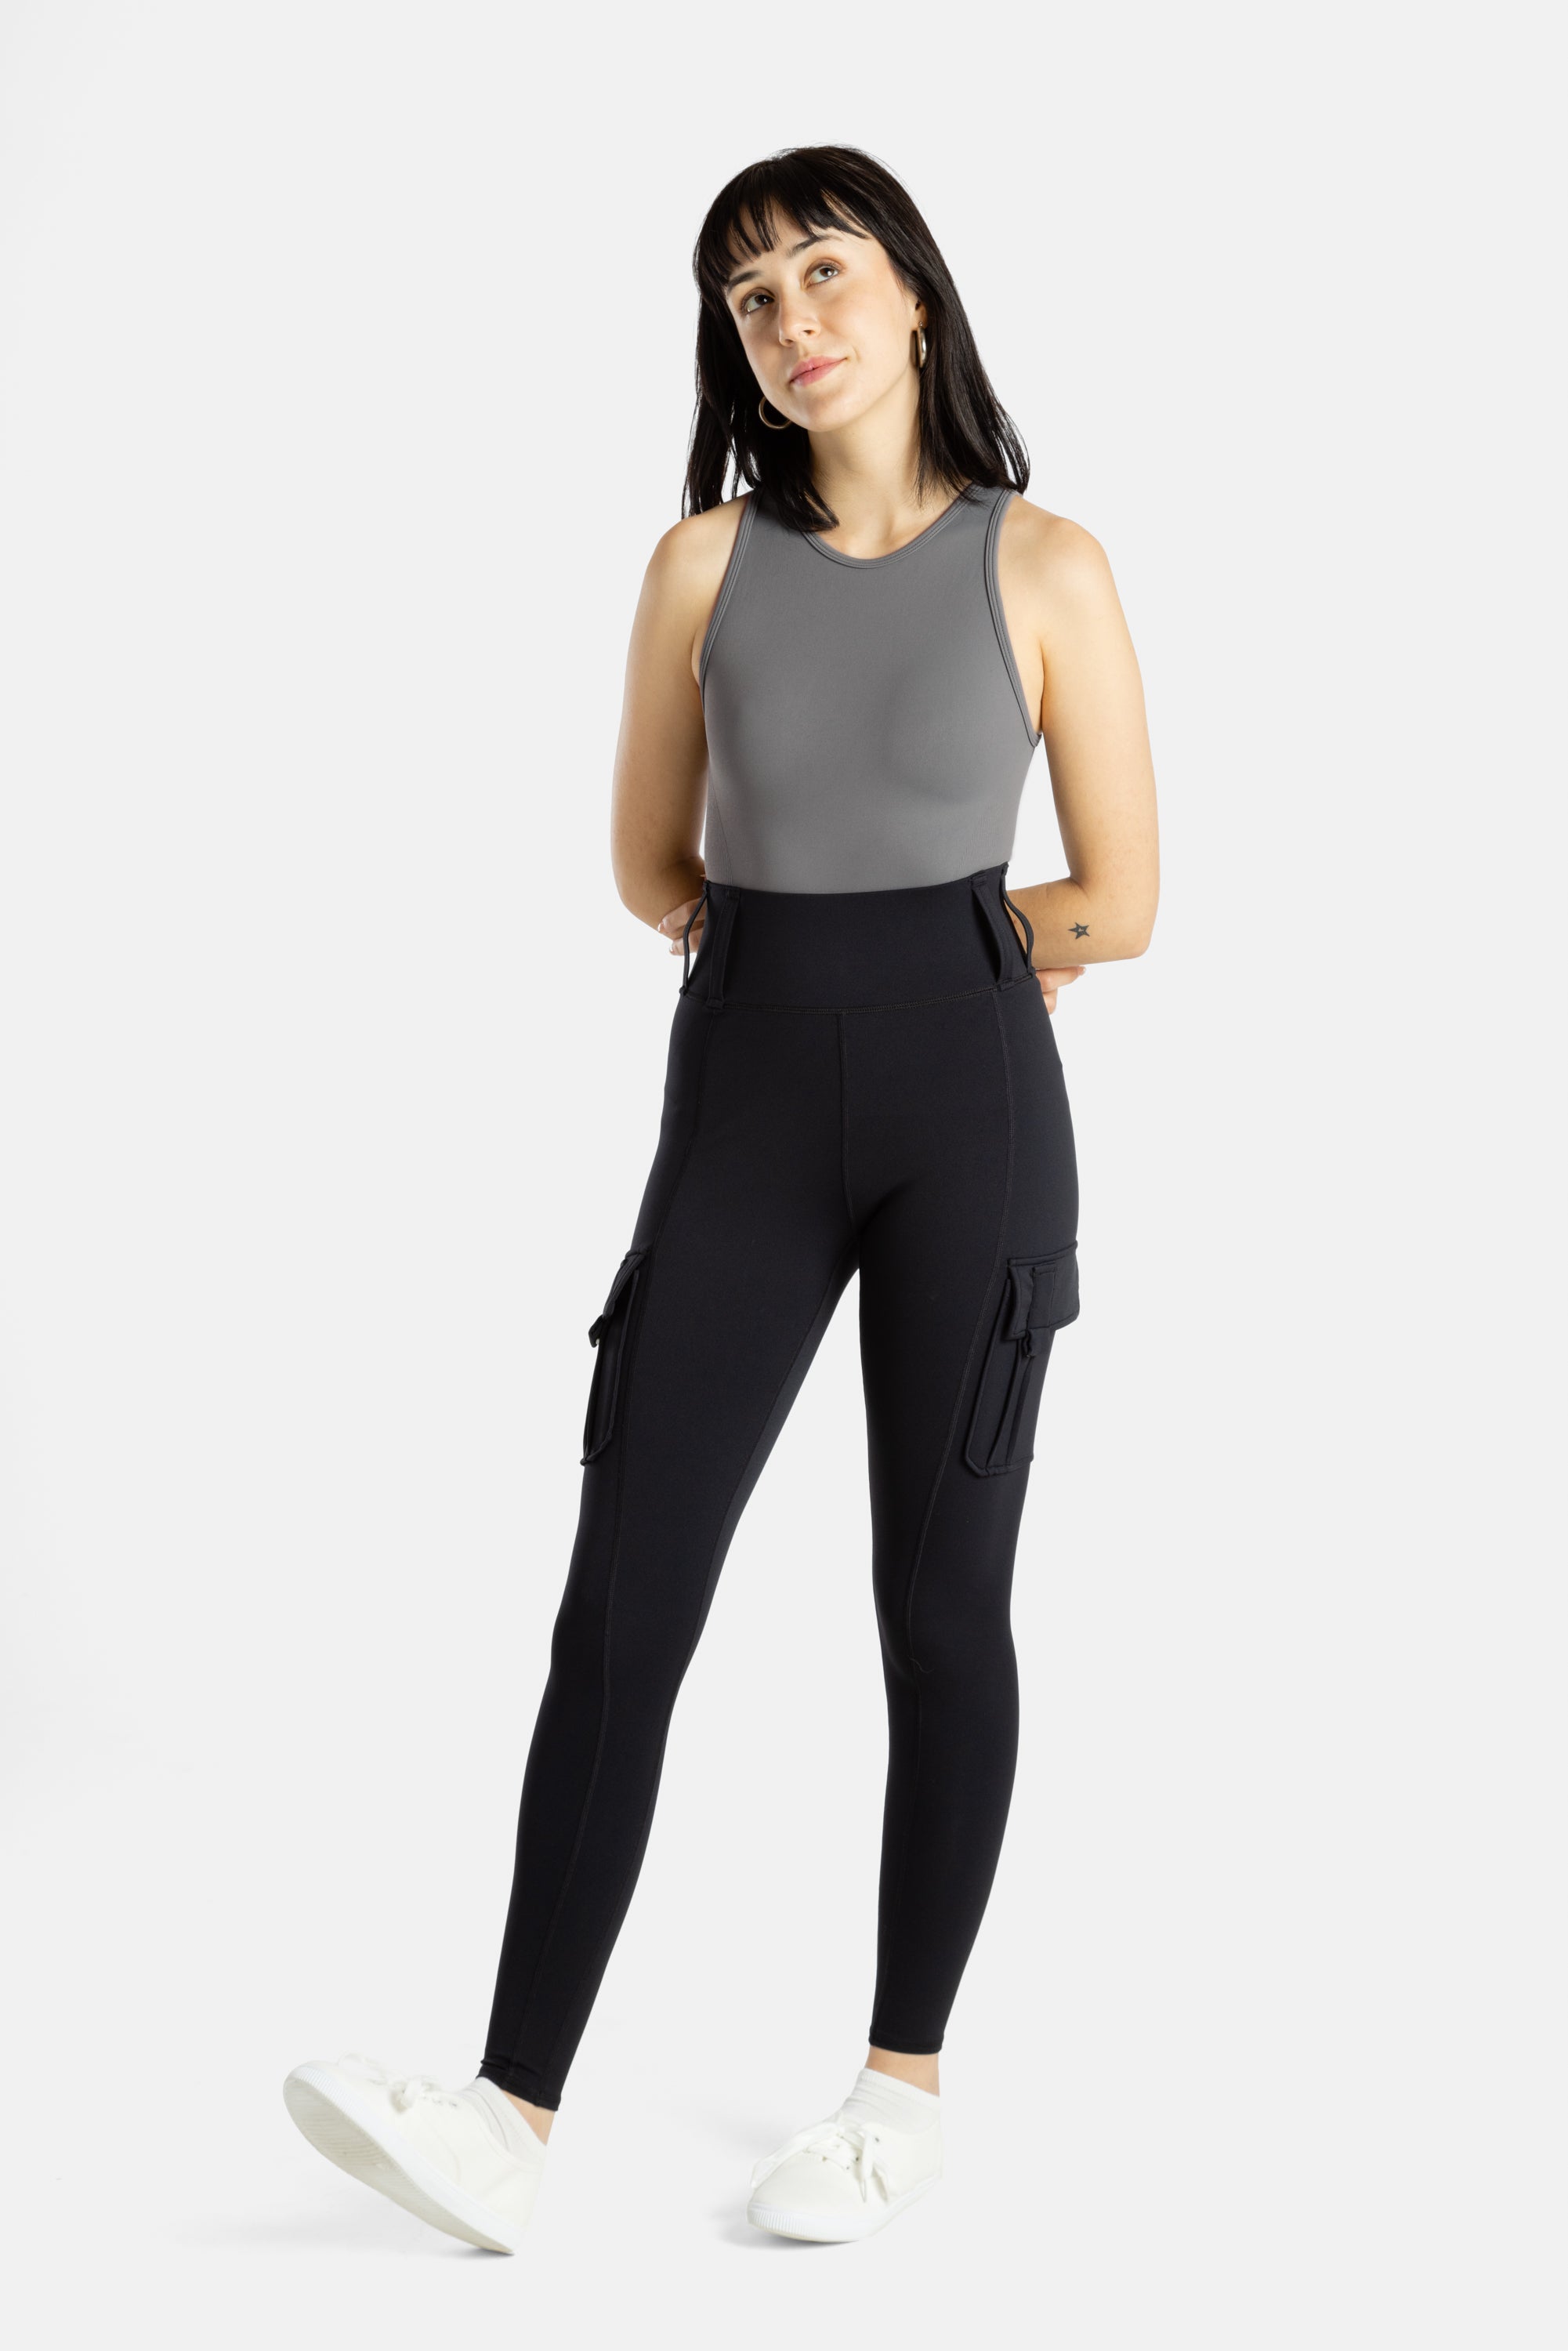 A white woman with long black hair and hoop earrings wears a charcoal tank top and black leggings. Her arms are behind her back and she raises her right ankle, showing her white sneakers.